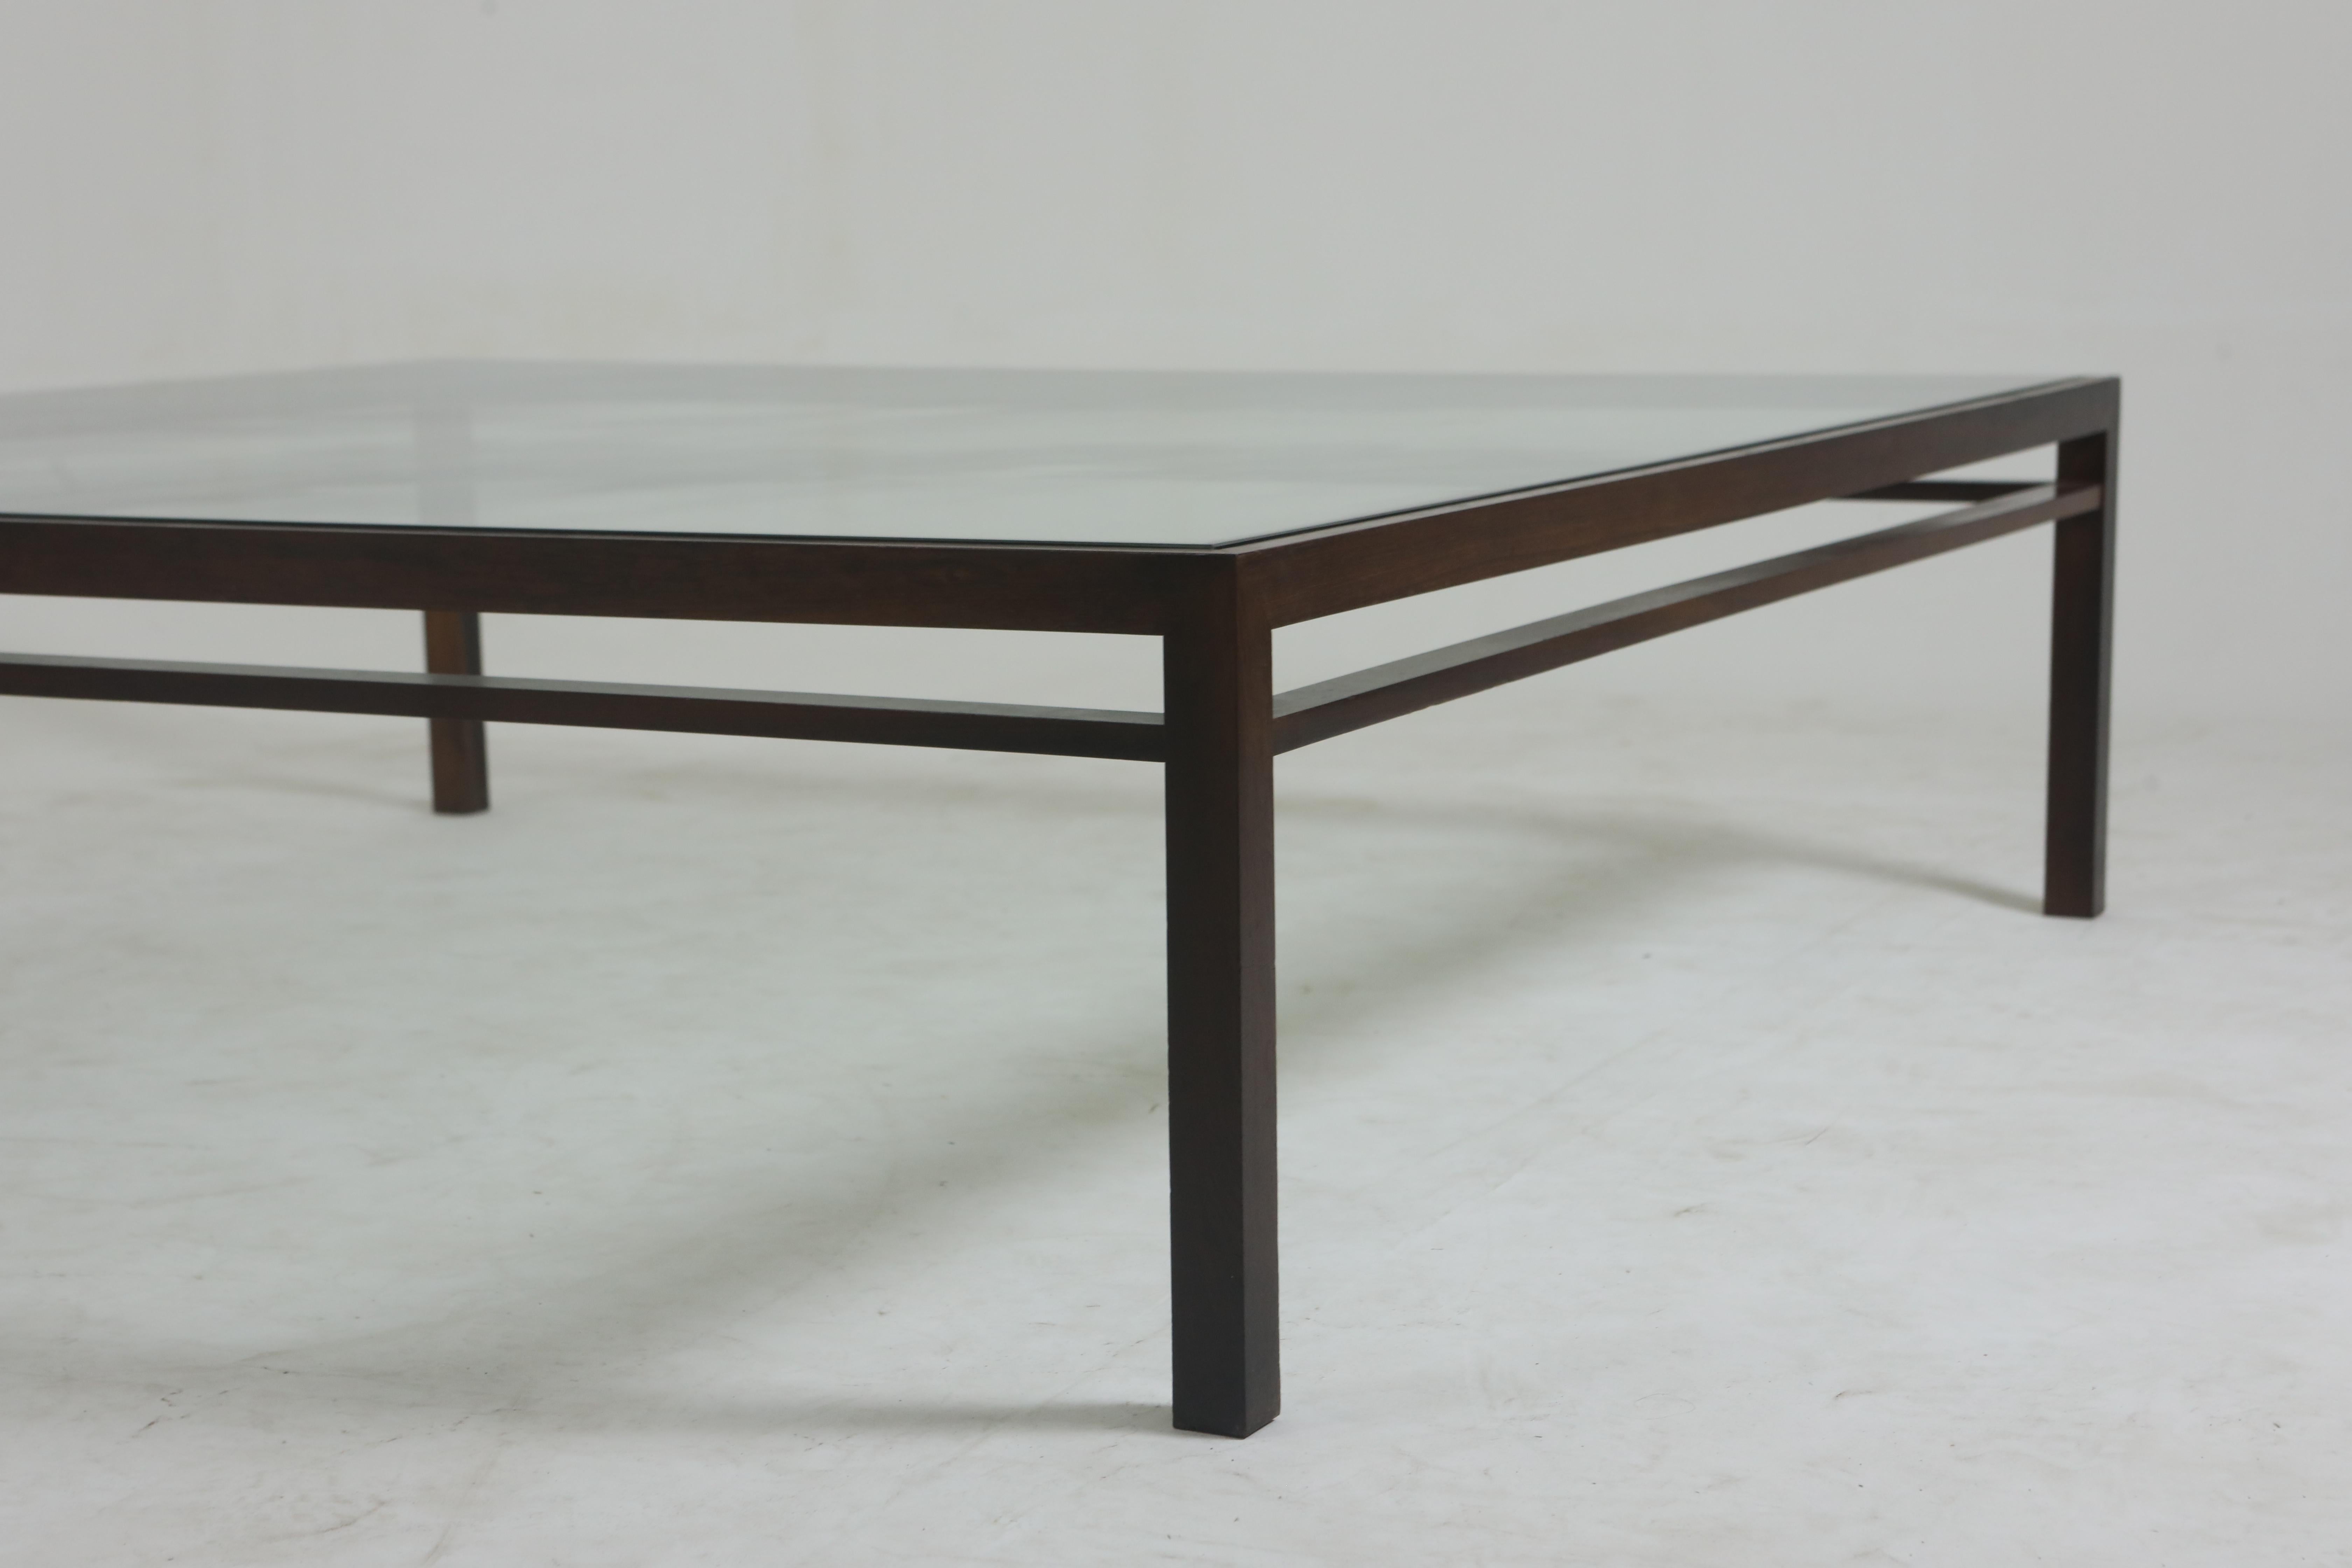 Varnished Mid-Century Modern Center Table by Joaquim Tenreiro, Brazil, 1960s For Sale